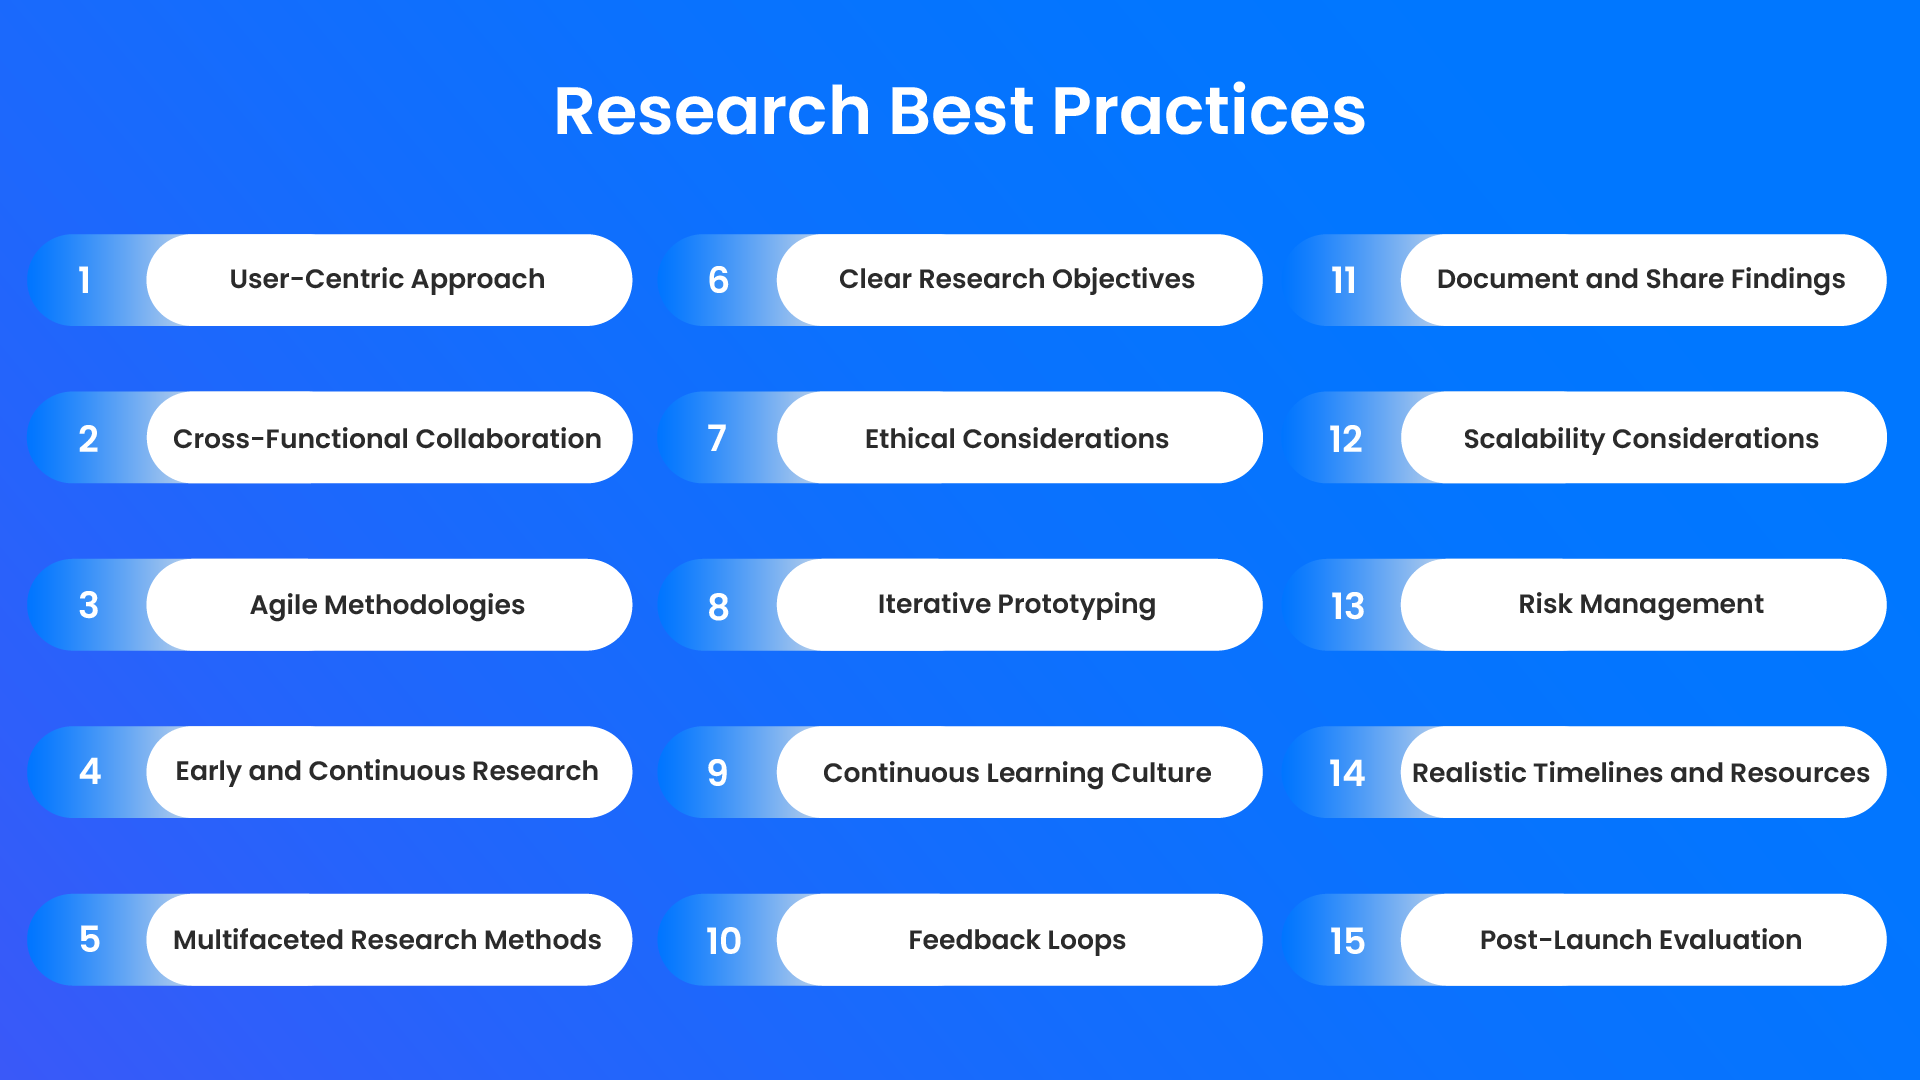 Research best practices